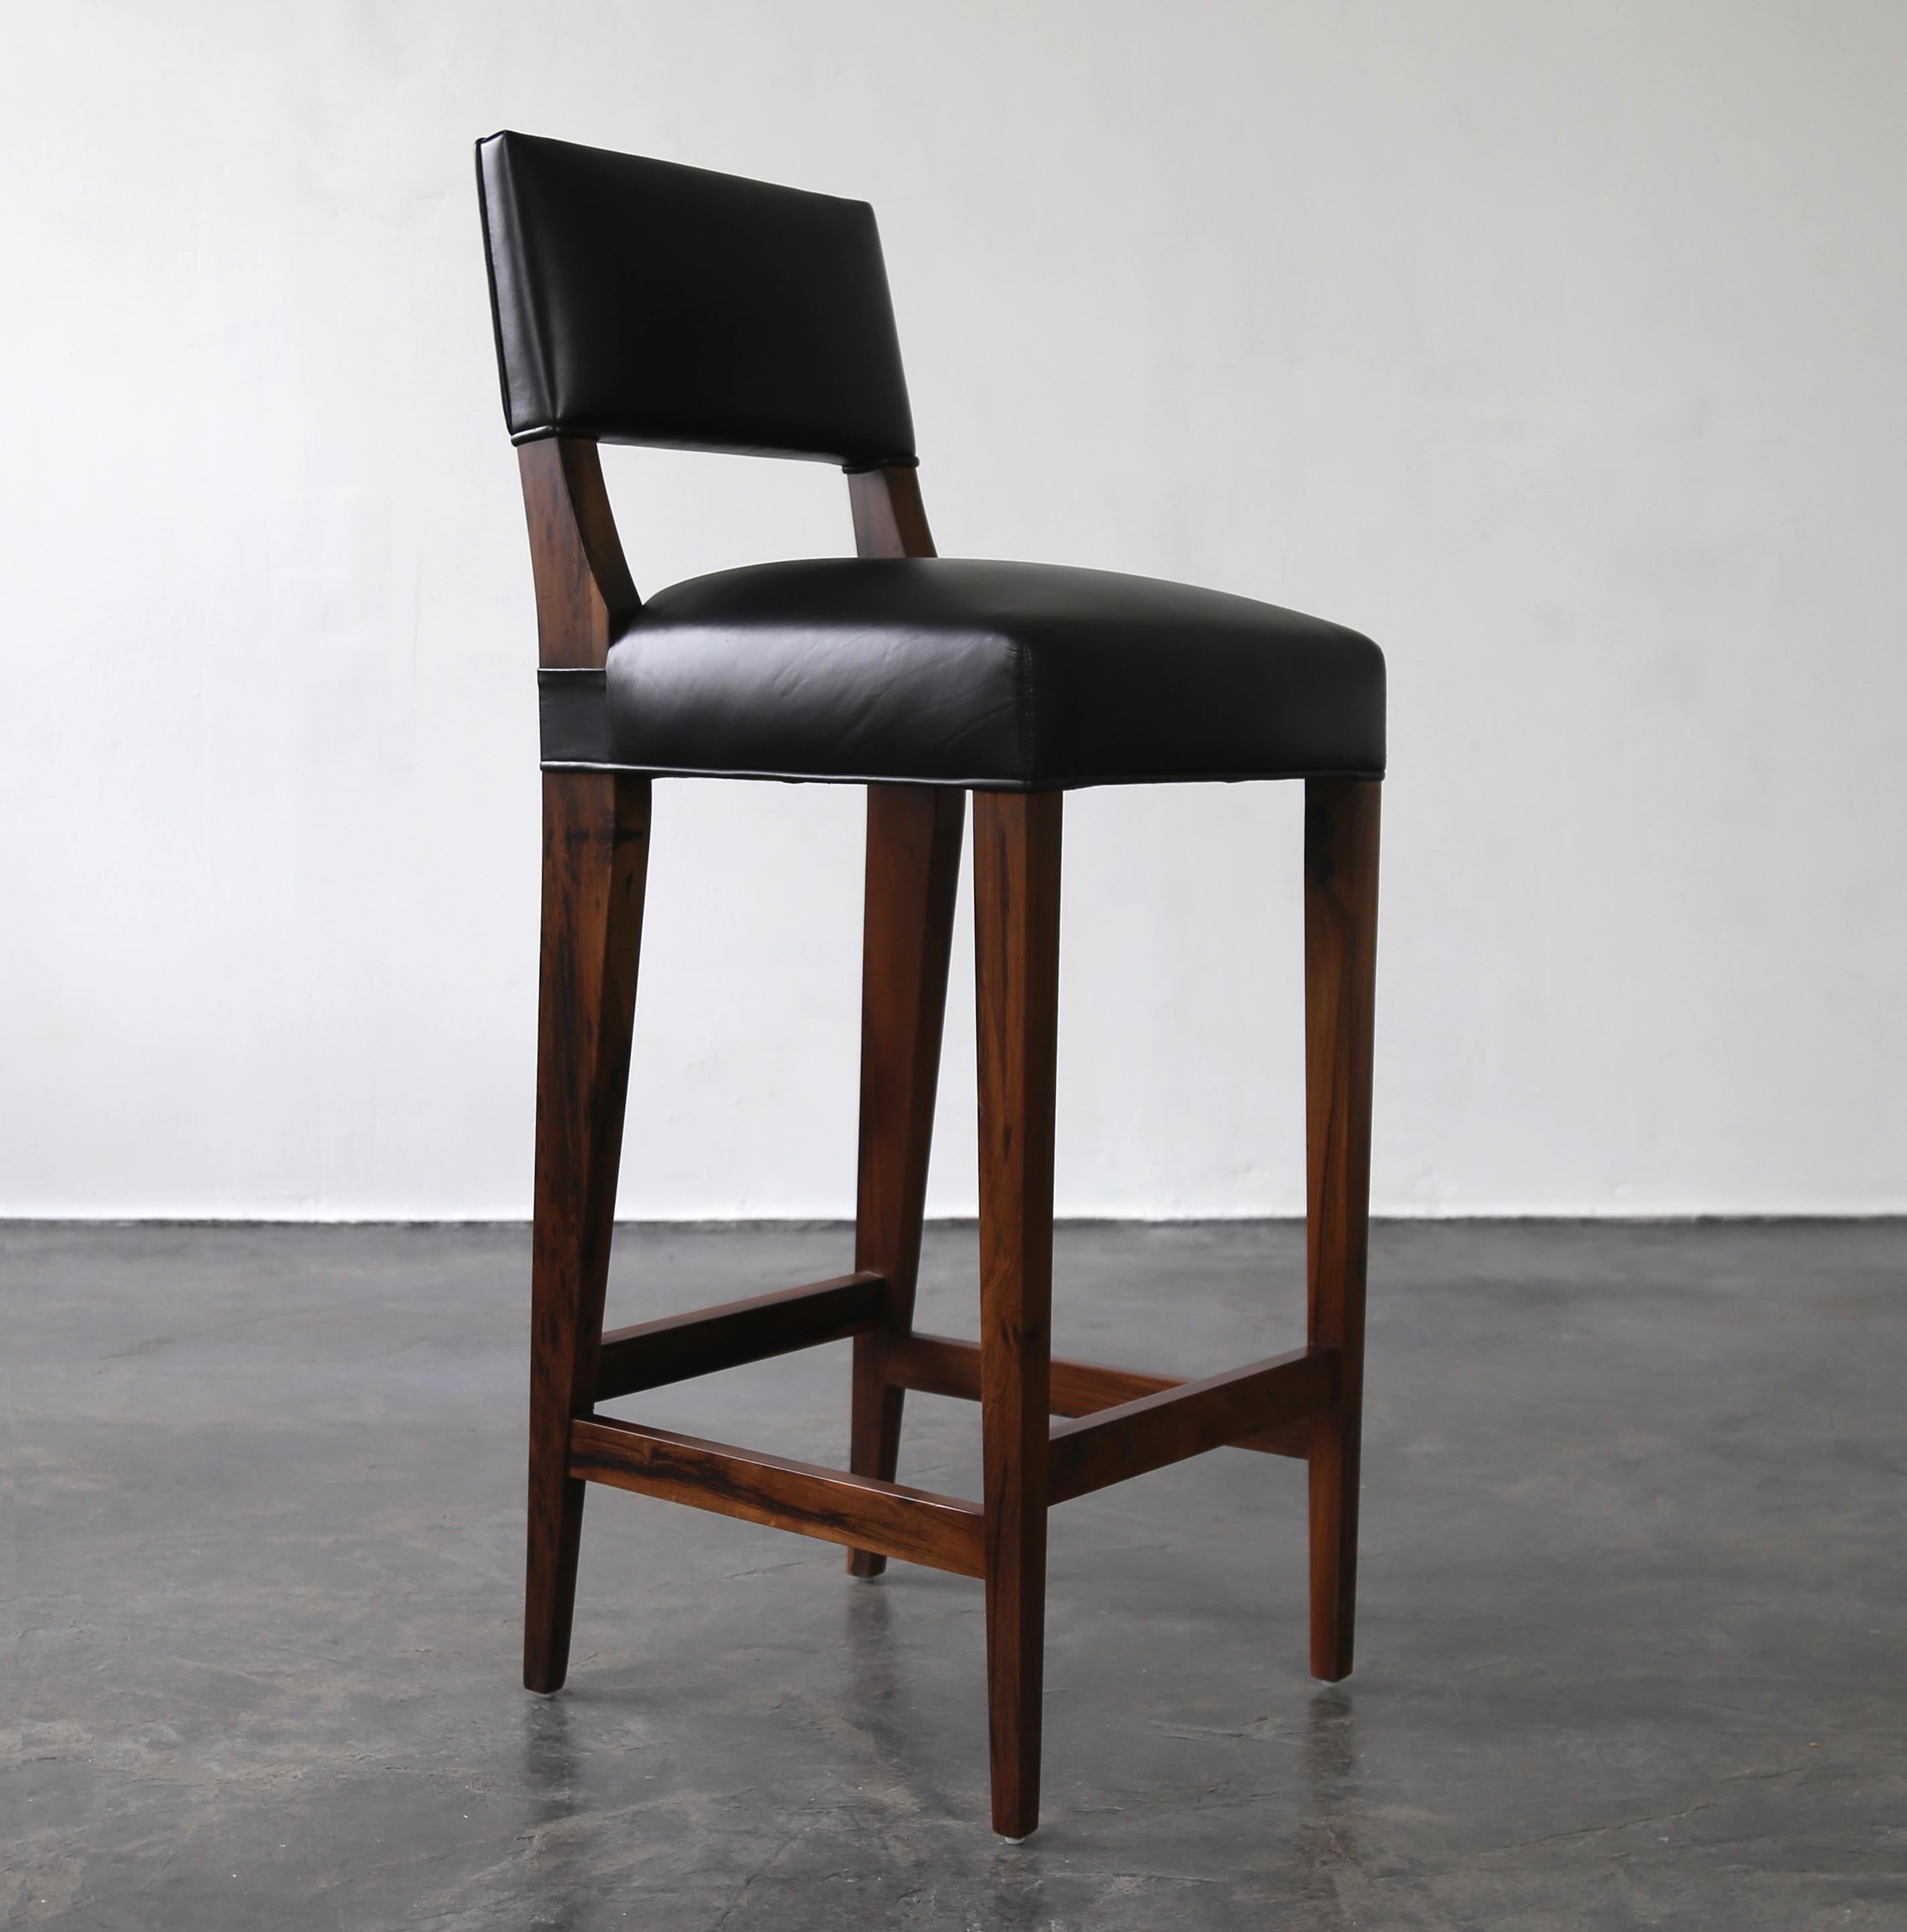 Costantini prides itself in using the hardest and most beautiful hardwoods in the construction of its line of seating. Shown in Argentine Rosewood, the Bruno Stool has a relatively low, angular back leg that alludes the chair of the same name.